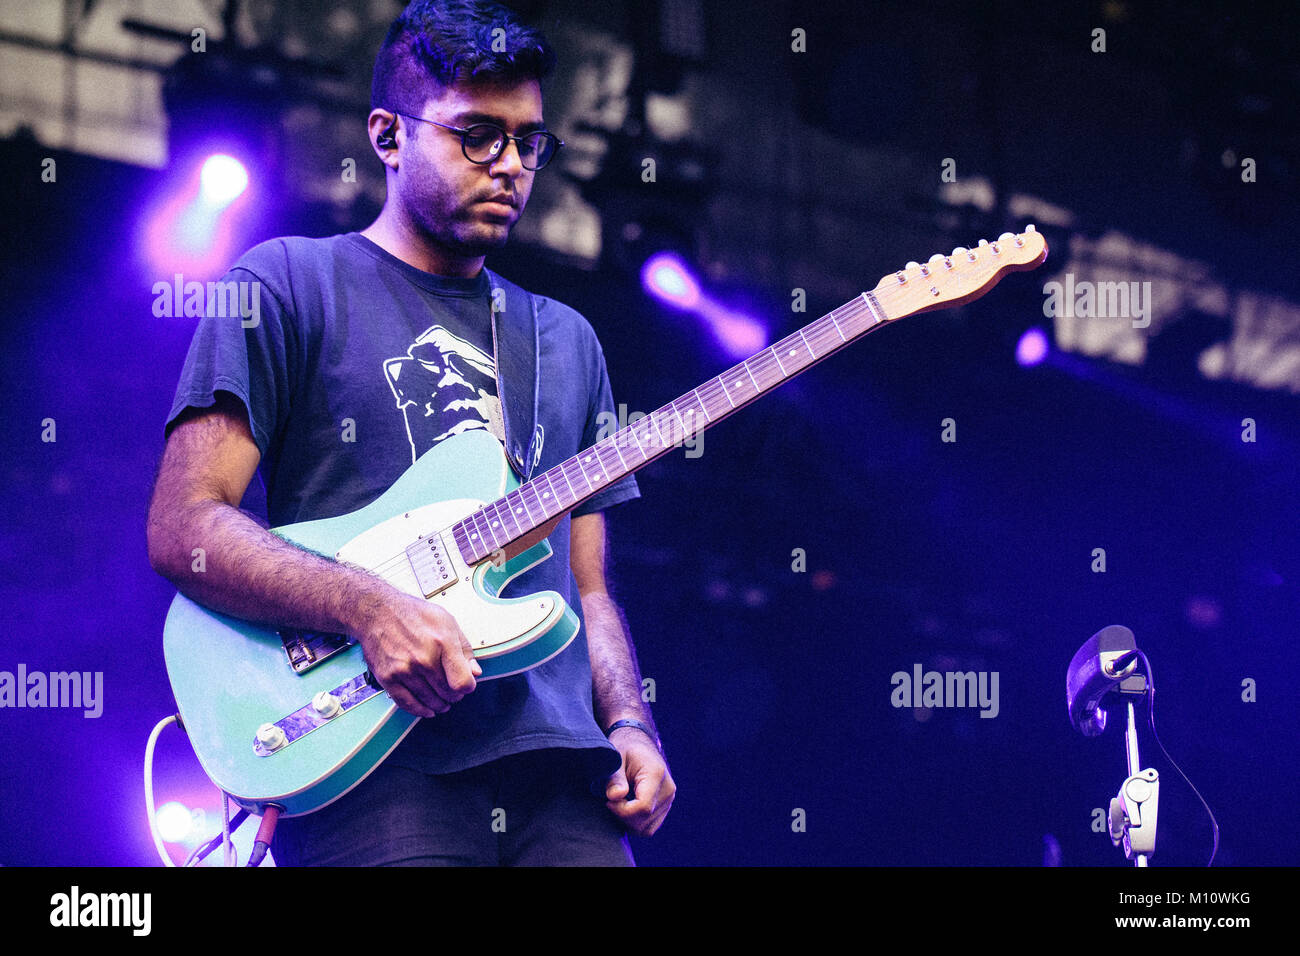 The American band Son Lux performs a live concert at the Polish music festival Off Festival 2015 in Katowice. The band consists of singer Ryan Lott, guitarist Rafiq Bhatia (pictured) and drummer Ian Chang. Poland, 09/08 2015. Stock Photo